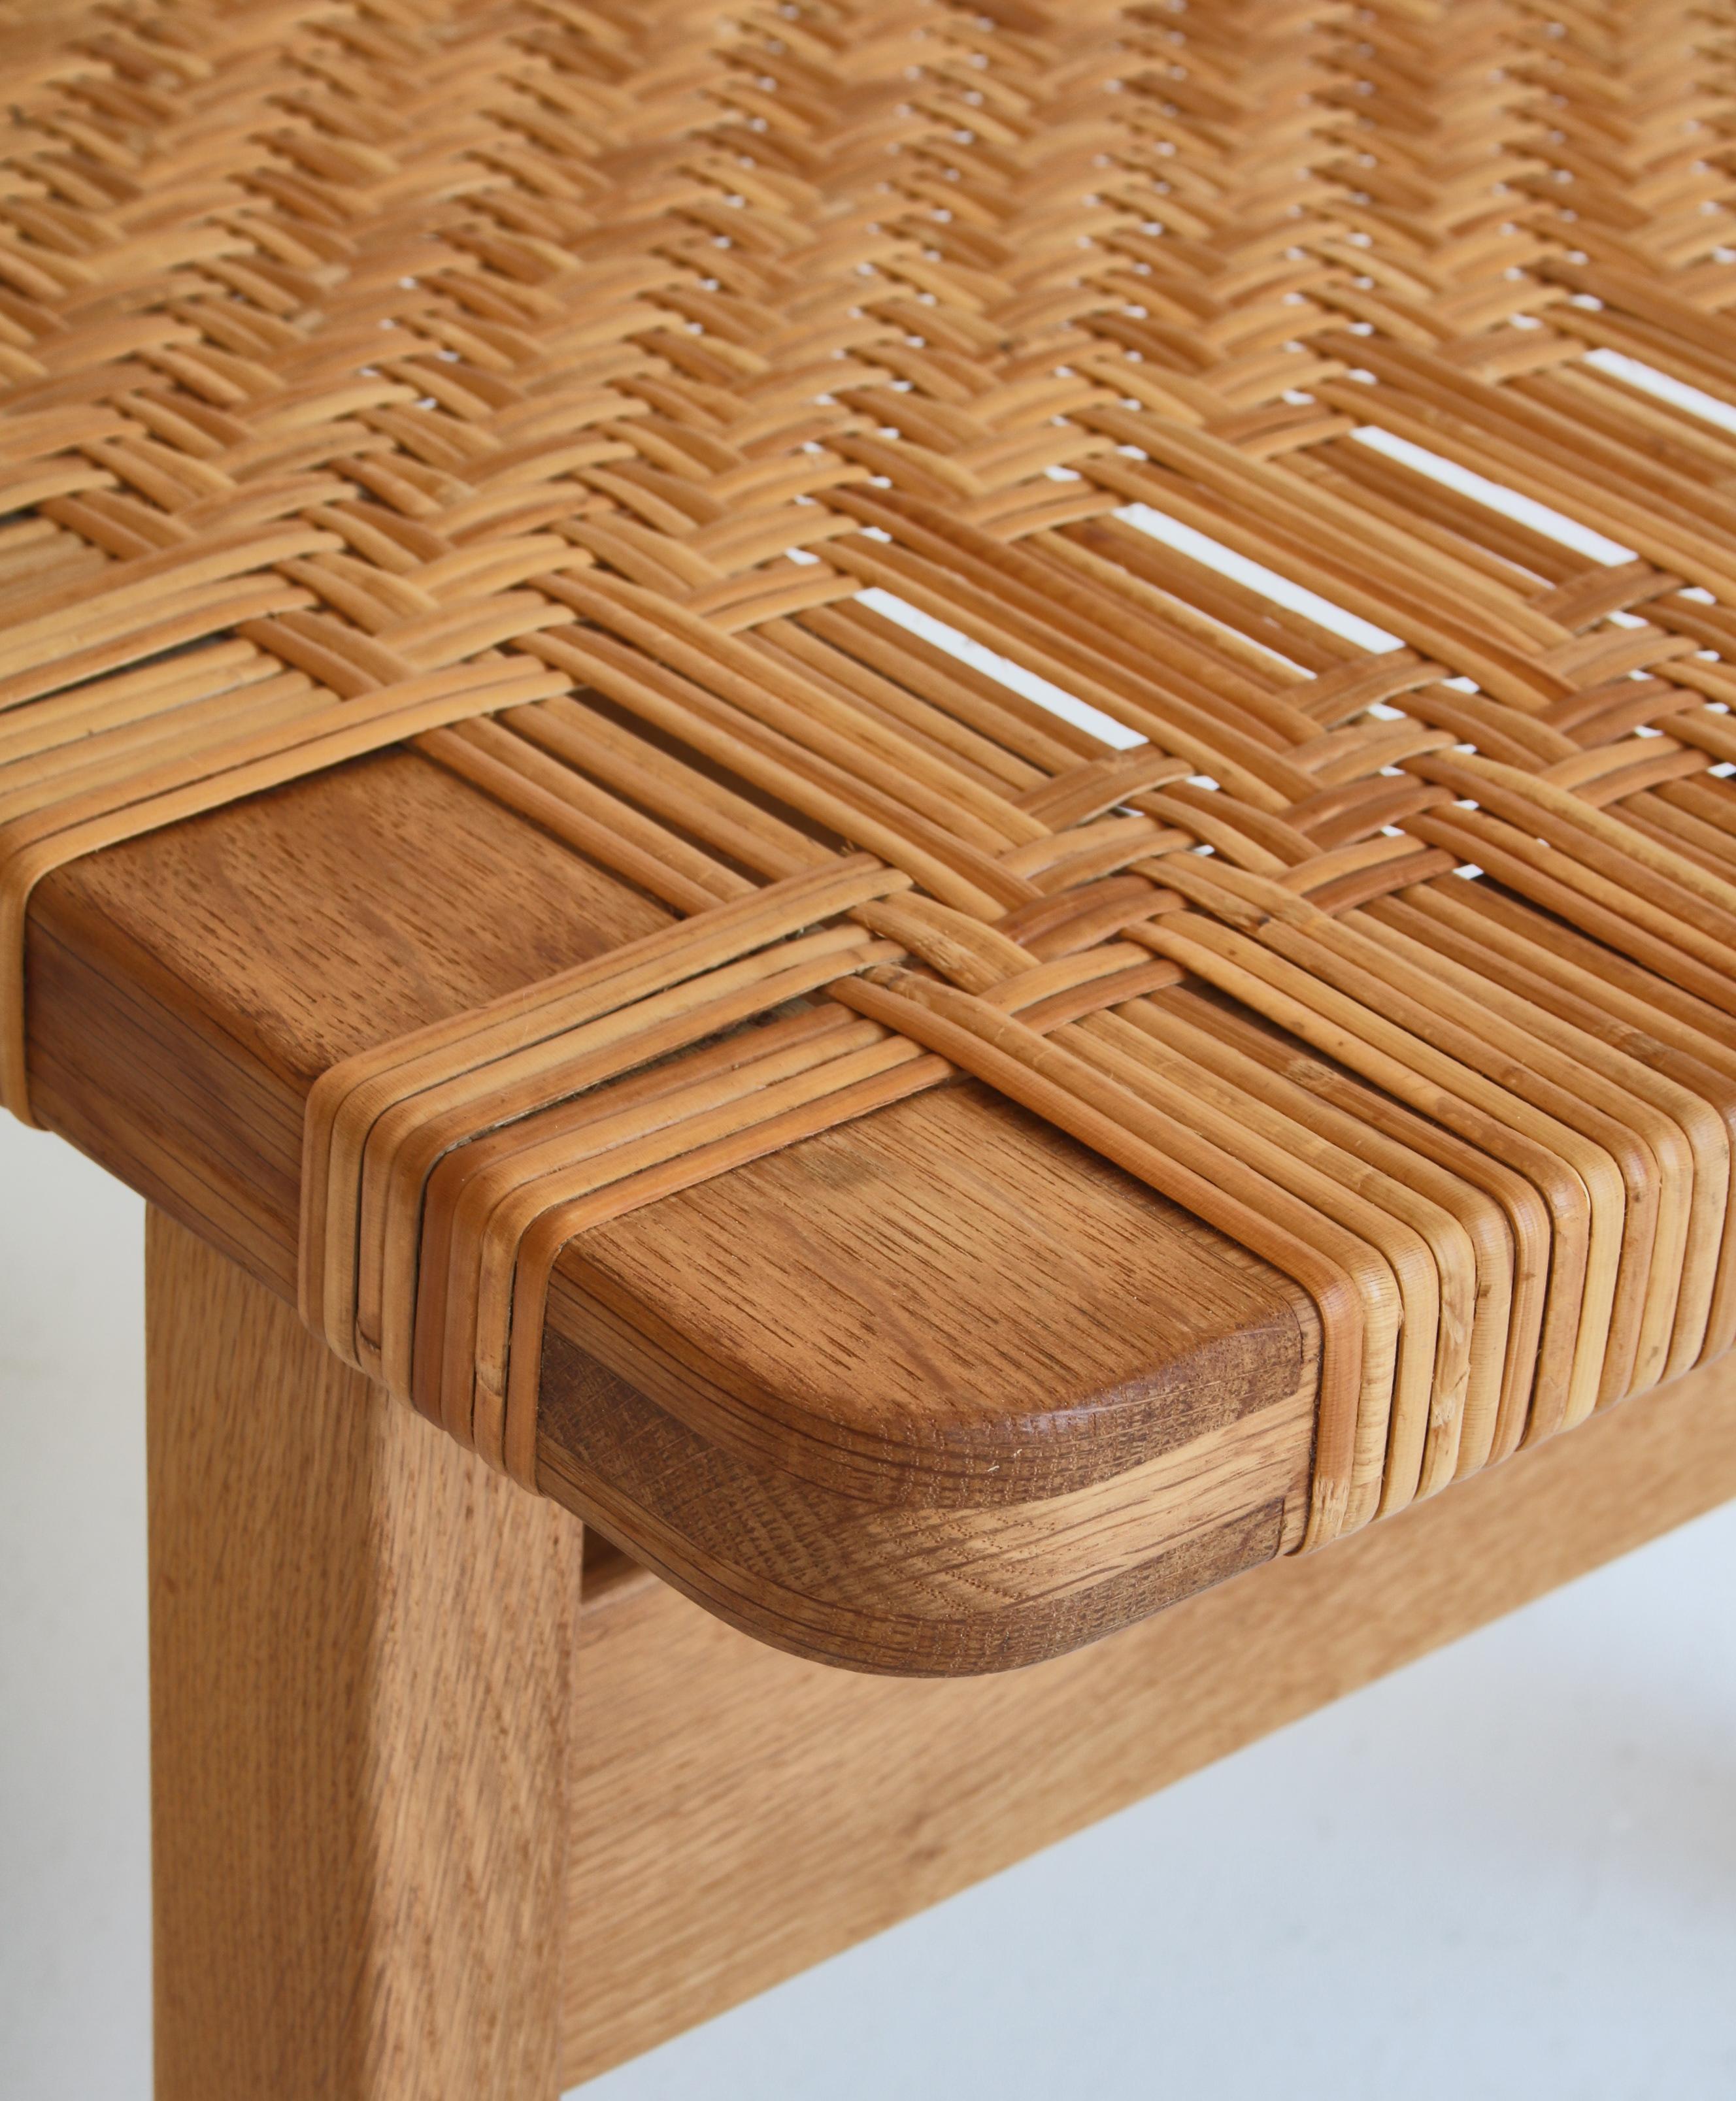 Borge Mogensen Side Table/Bench in Oak and Rattan Cane, 1950s, Denmark For Sale 1